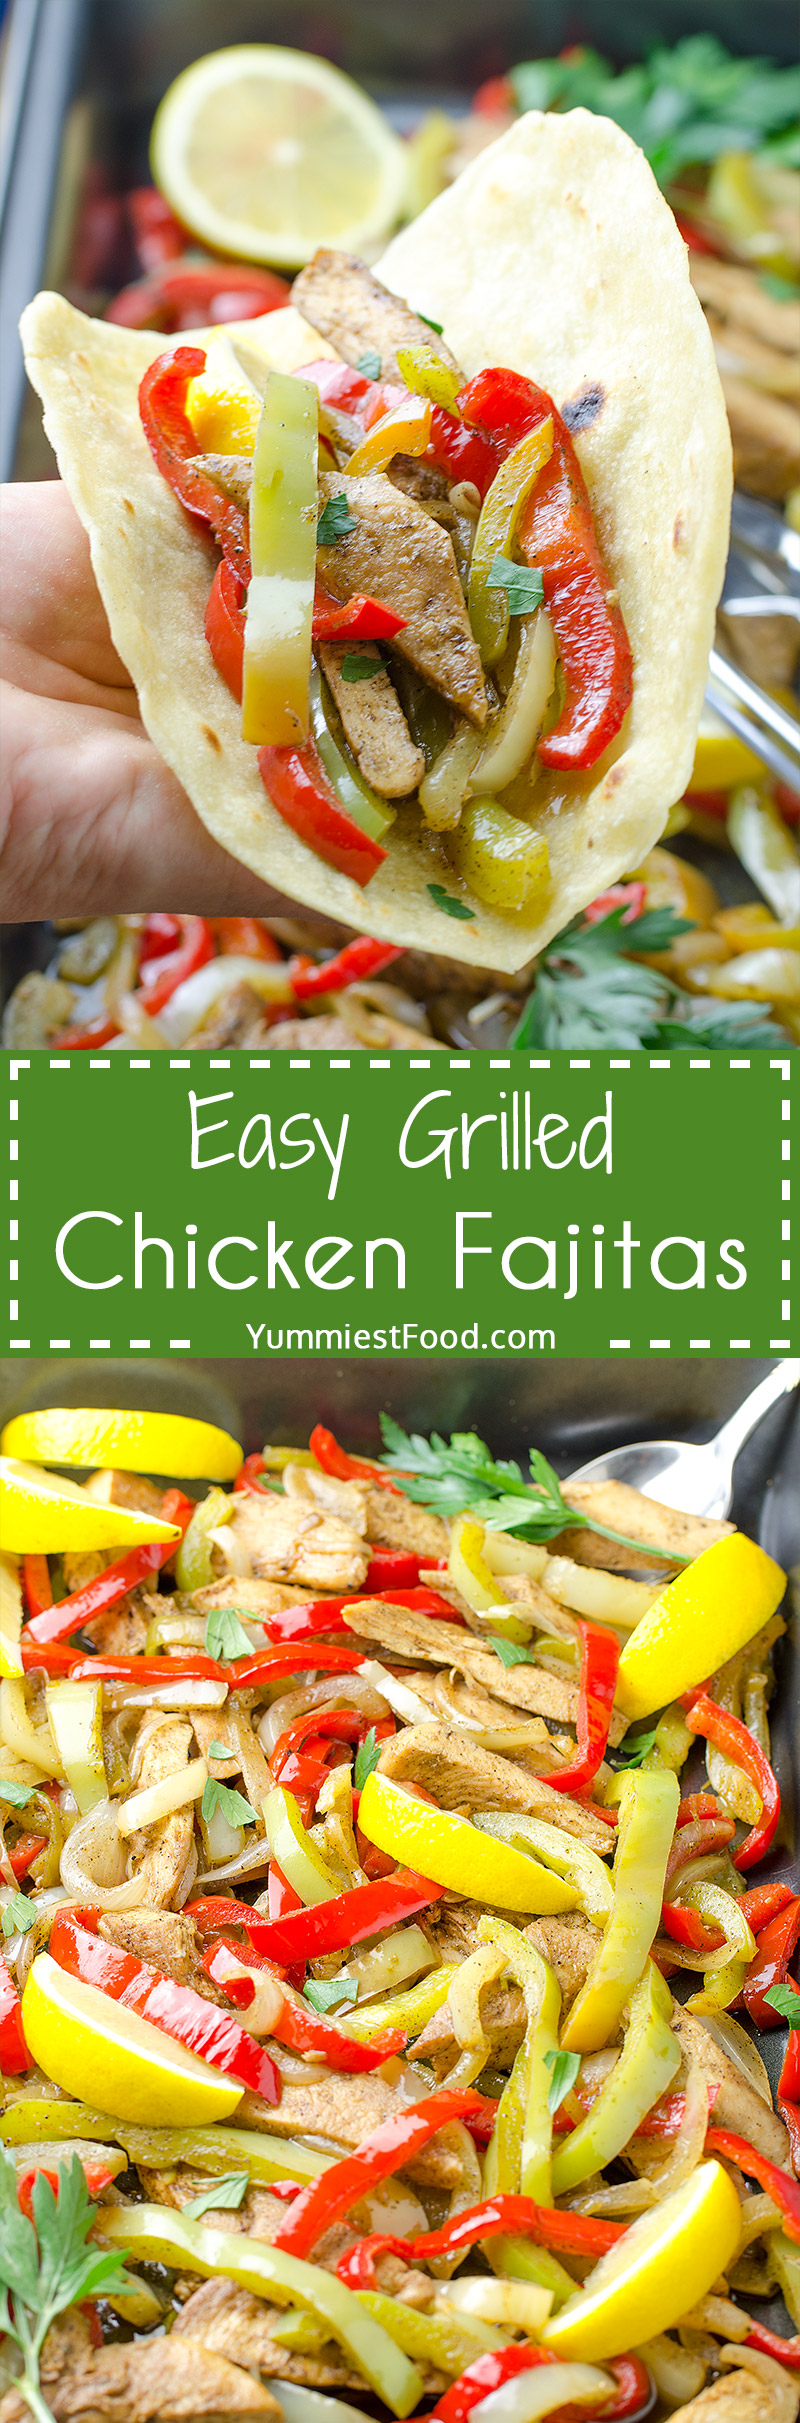 Easy Grilled Chicken Fajitas - perfect for fast, healthy, tasty and quick lunch or dinner